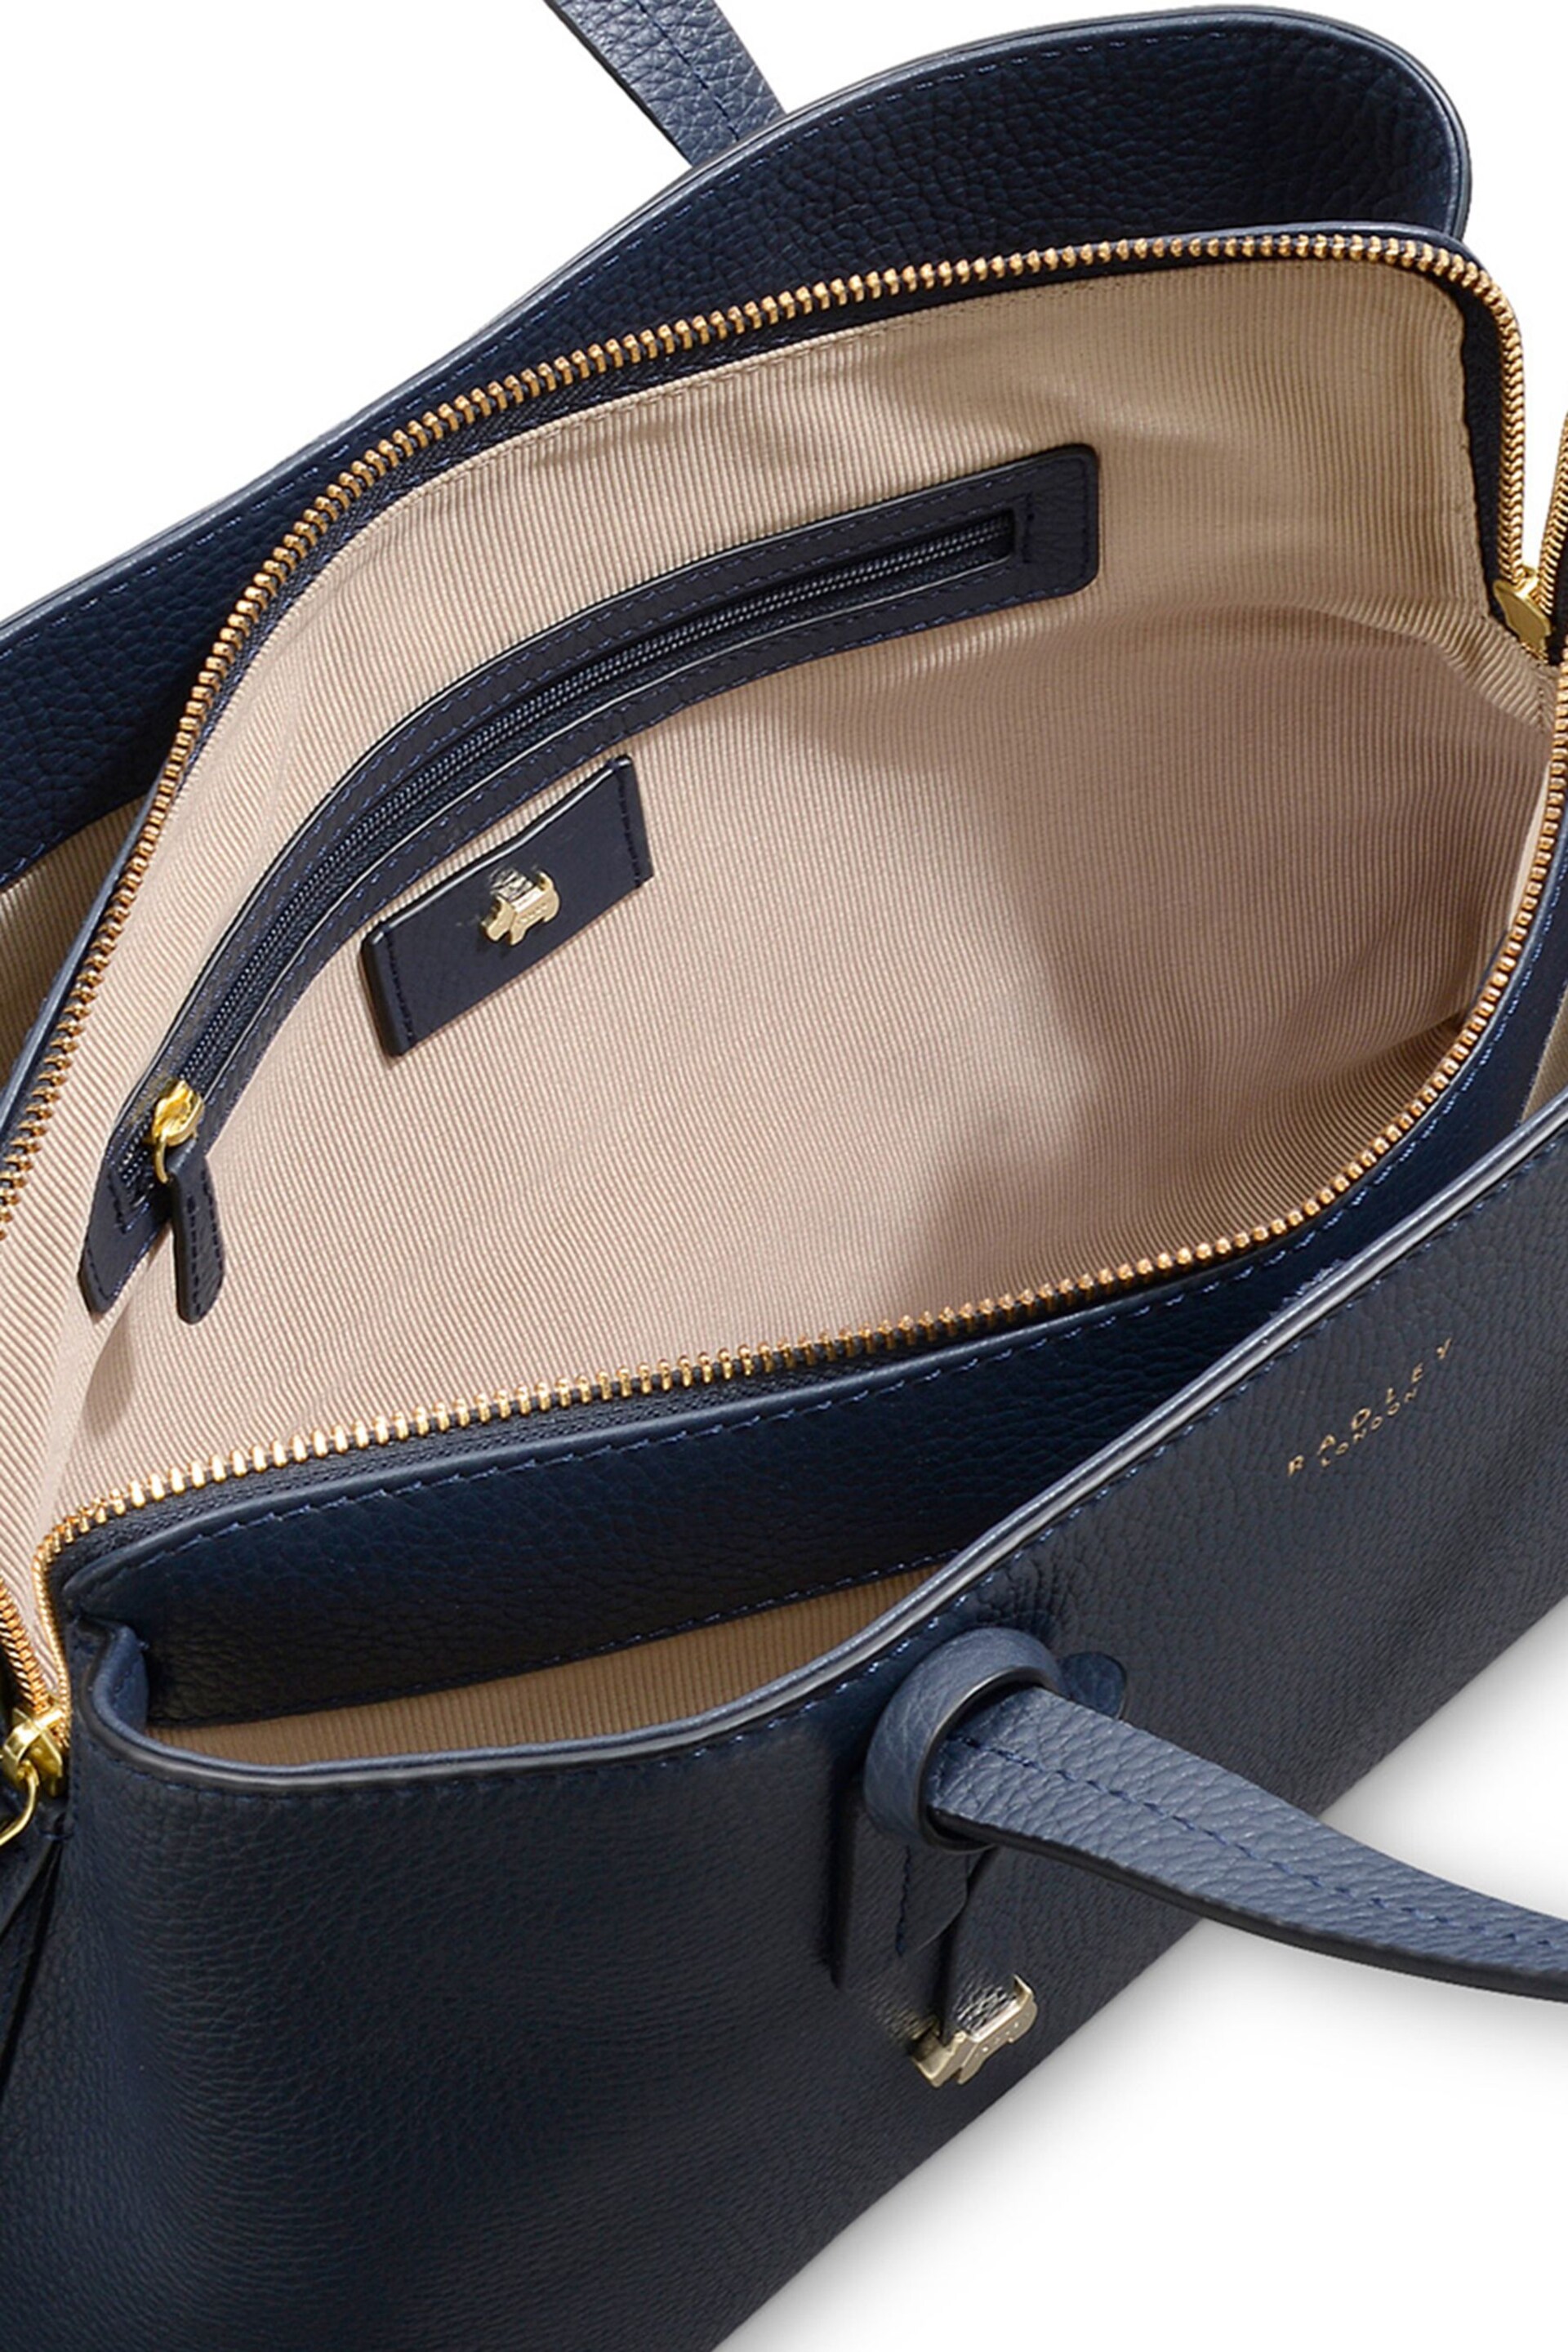 Radley London Dukes Place Large Open Top Workbag - Image 3 of 4